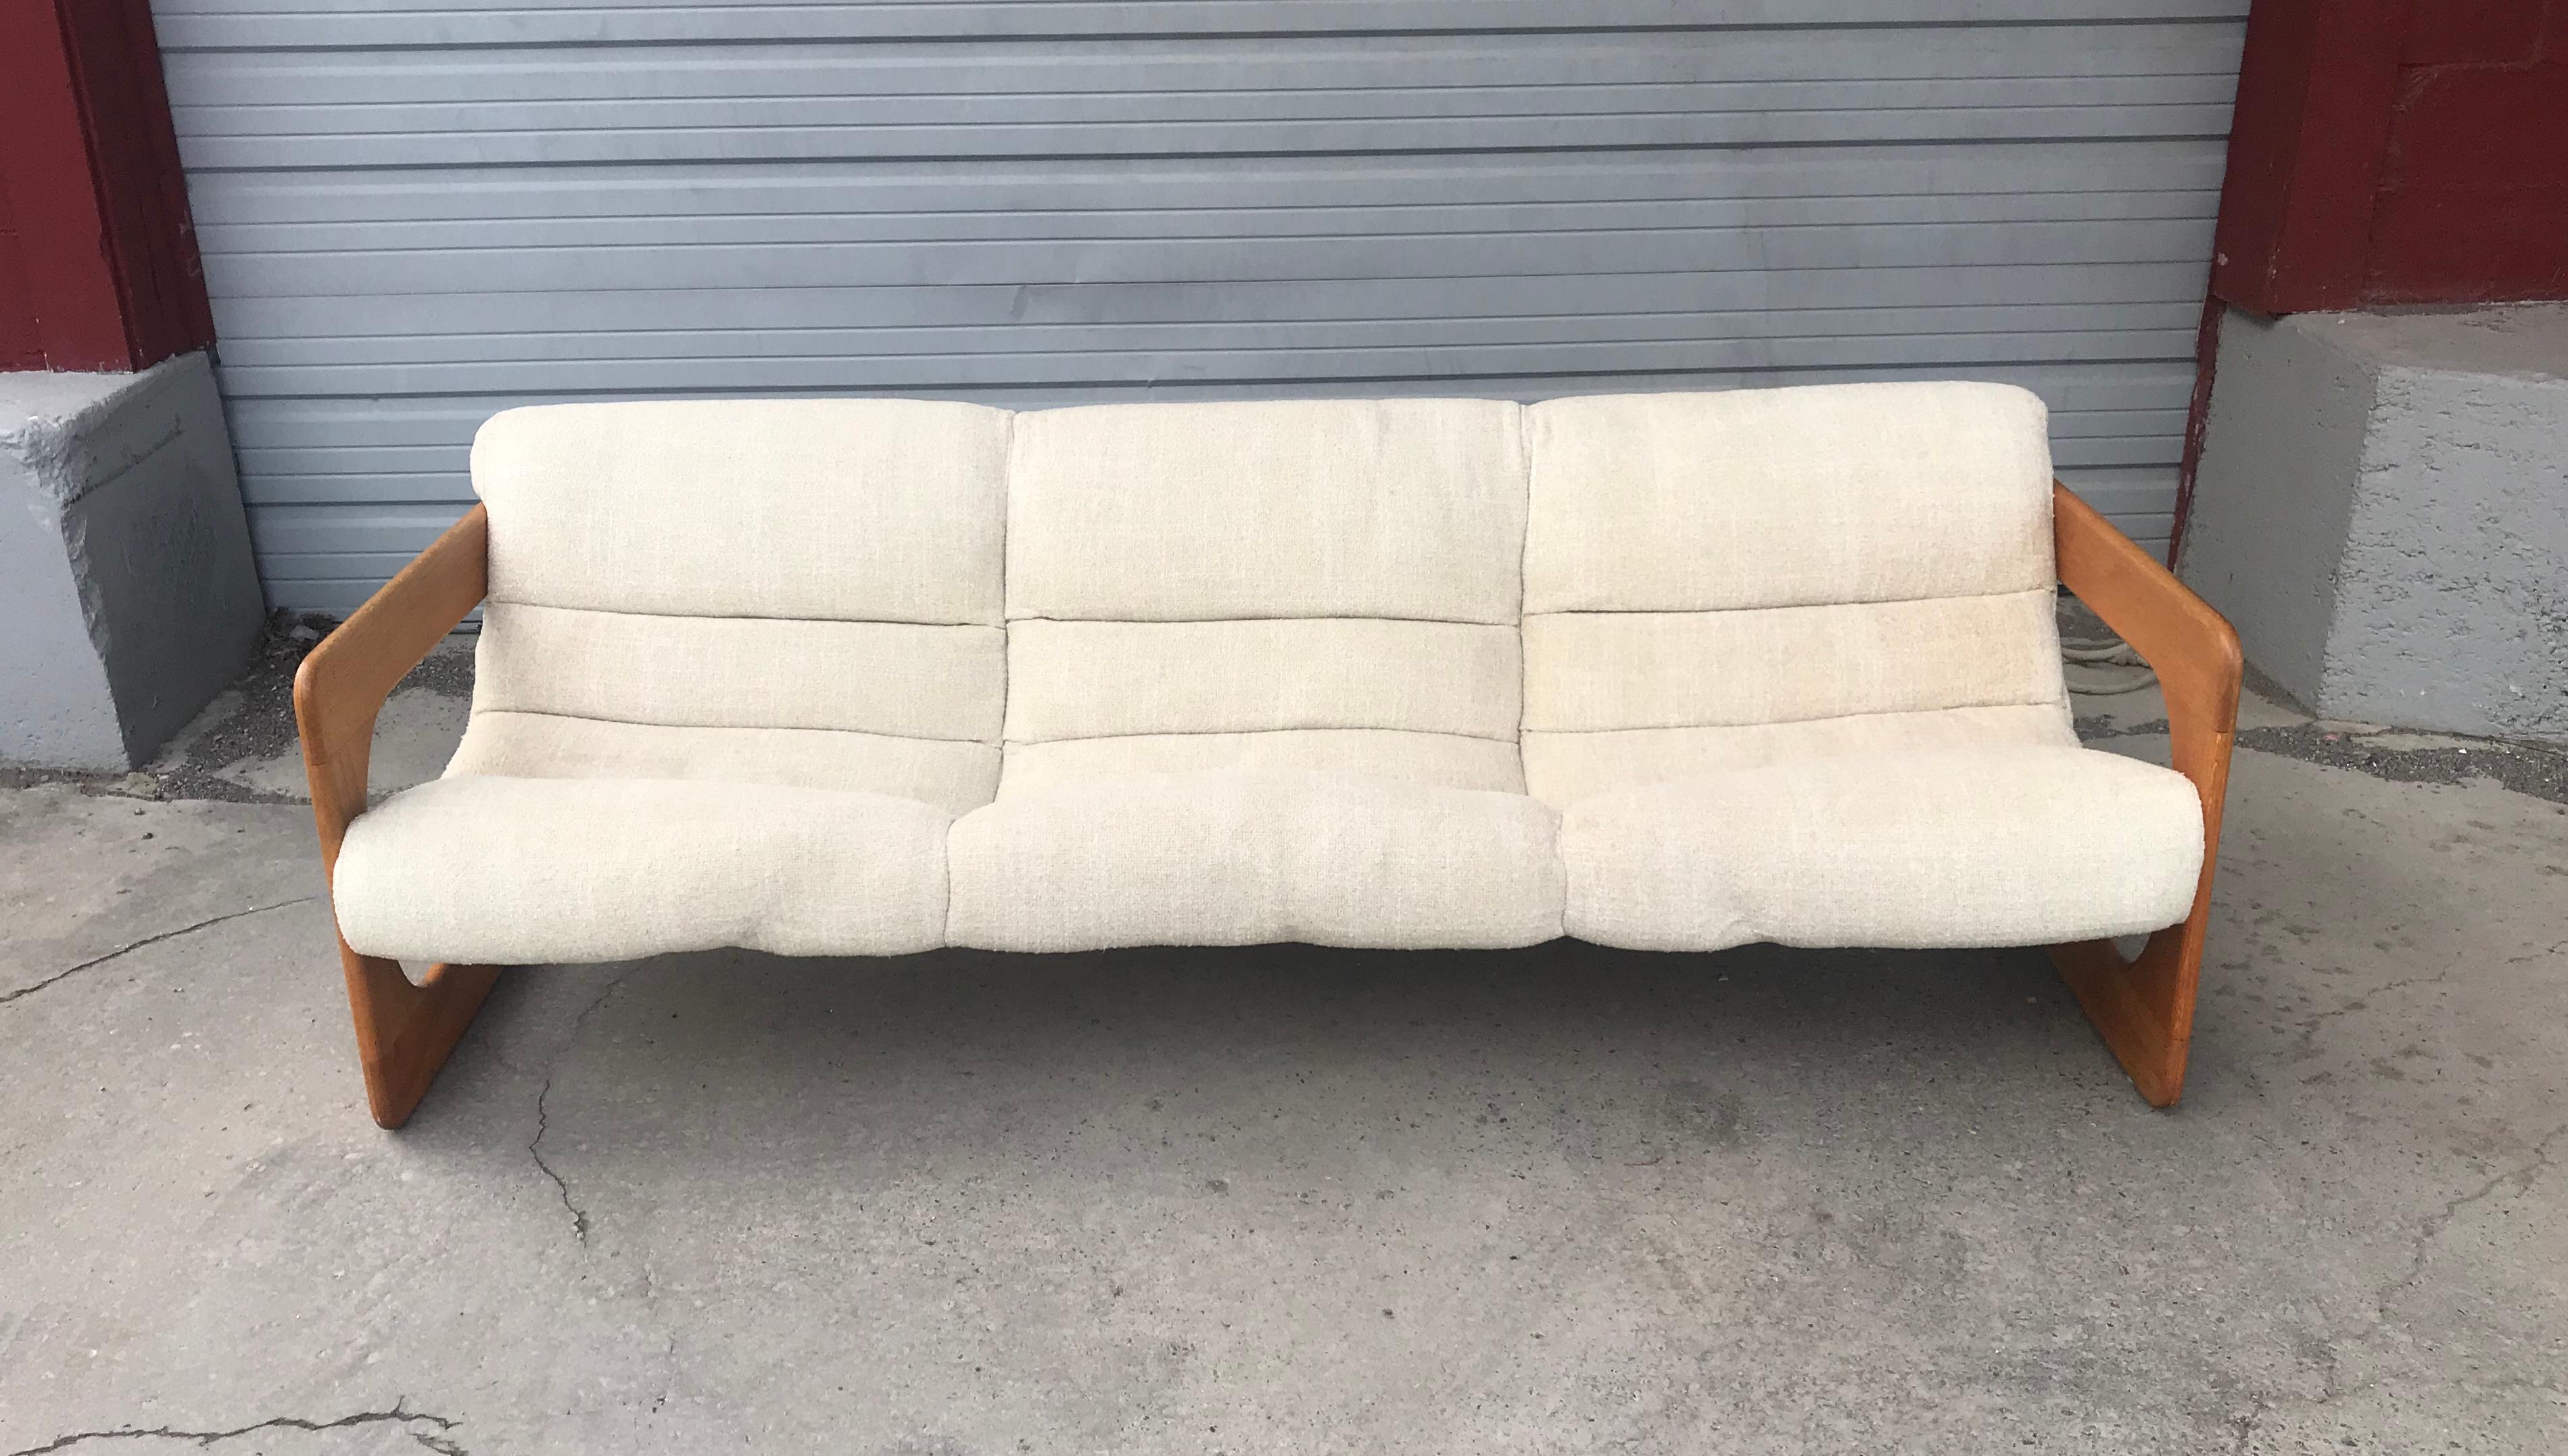 Mid-Century Modern Rare 3-Seat Sofa Designed by Lou Hodges, California Design Group 1970 Modernist For Sale